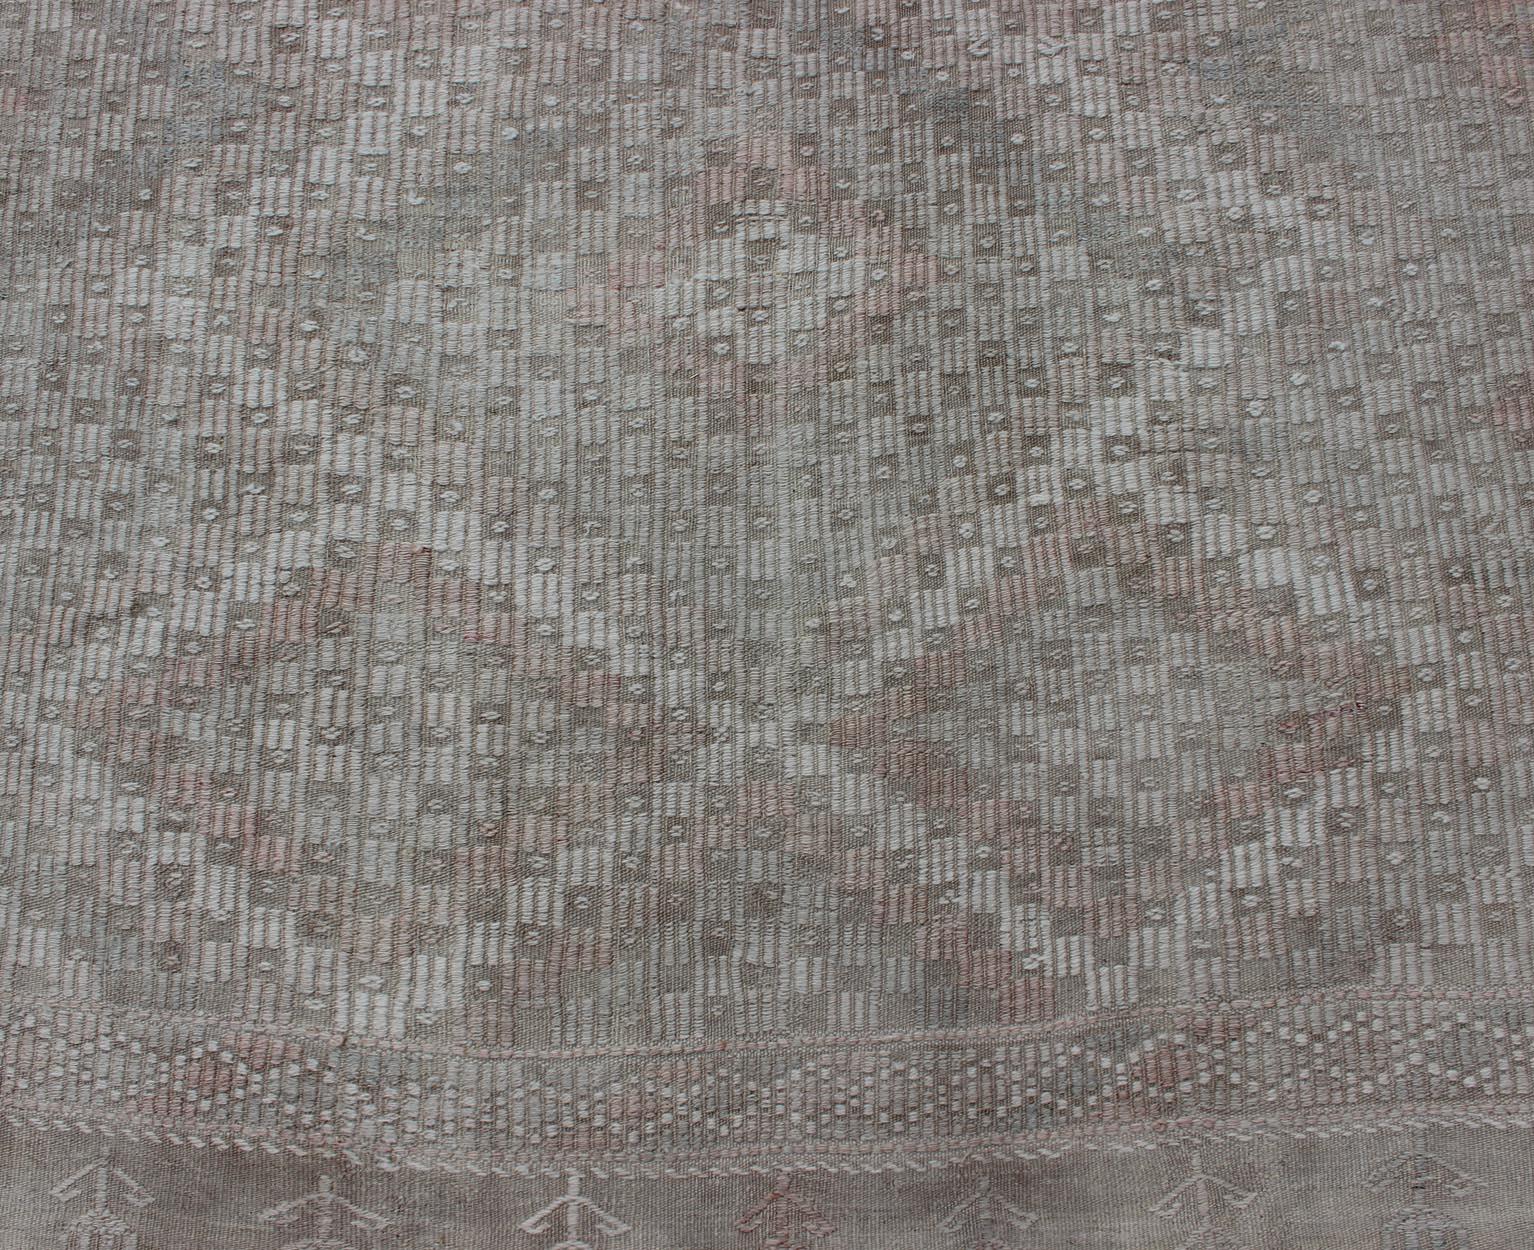 Vintage Turkish Embroidered Rug with Geometric Diamond Design in Neutral Tones For Sale 1